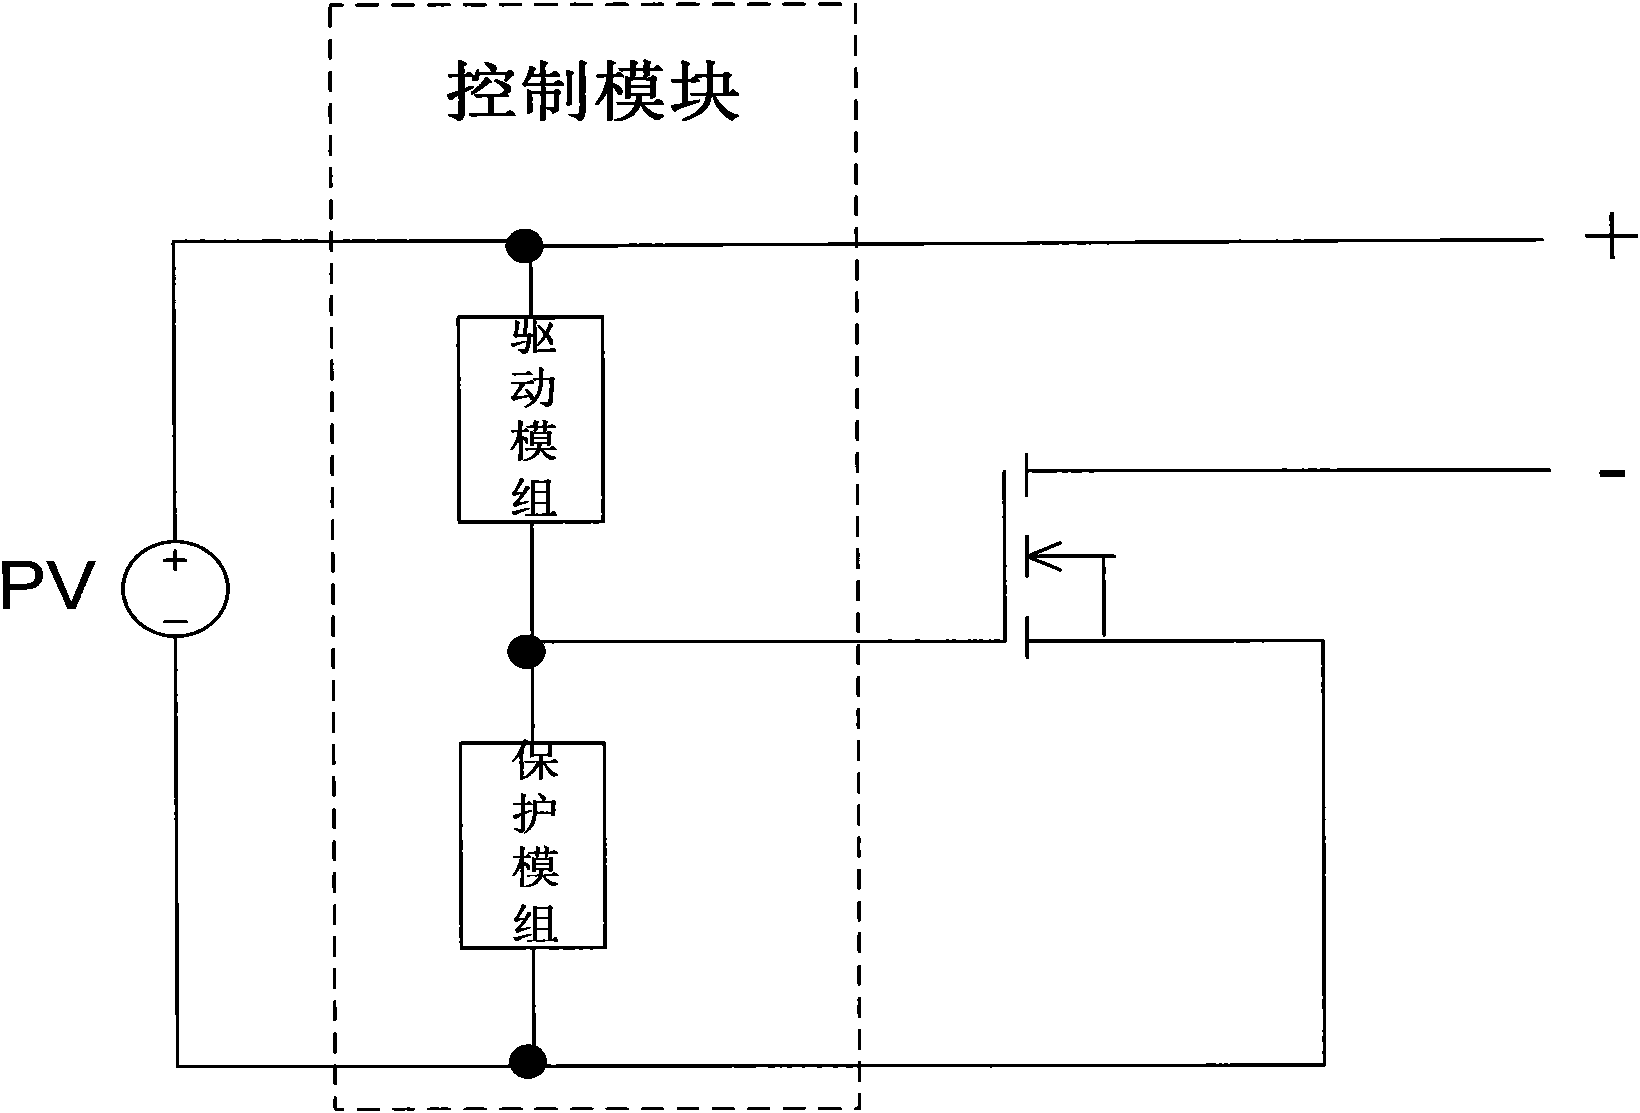 Parallel connection protection circuit for solar module